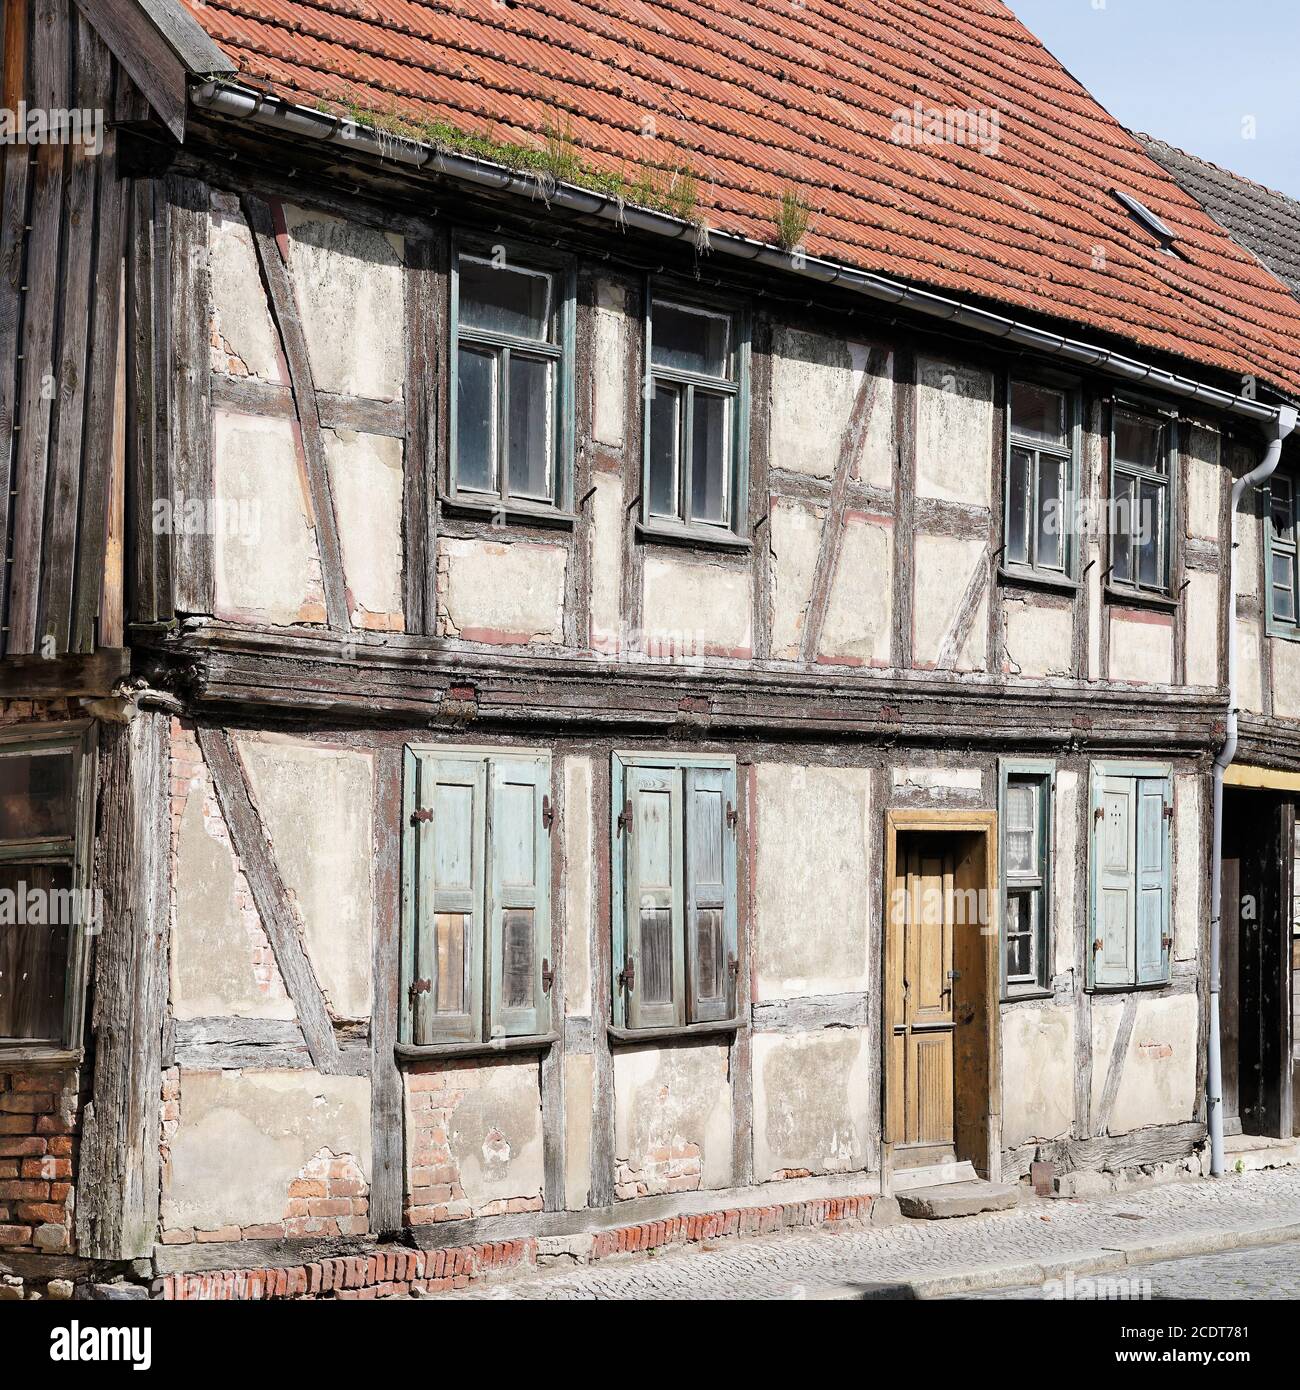 Old dilapidated unused half-timbered house in the old town of Tangermuende Stock Photo